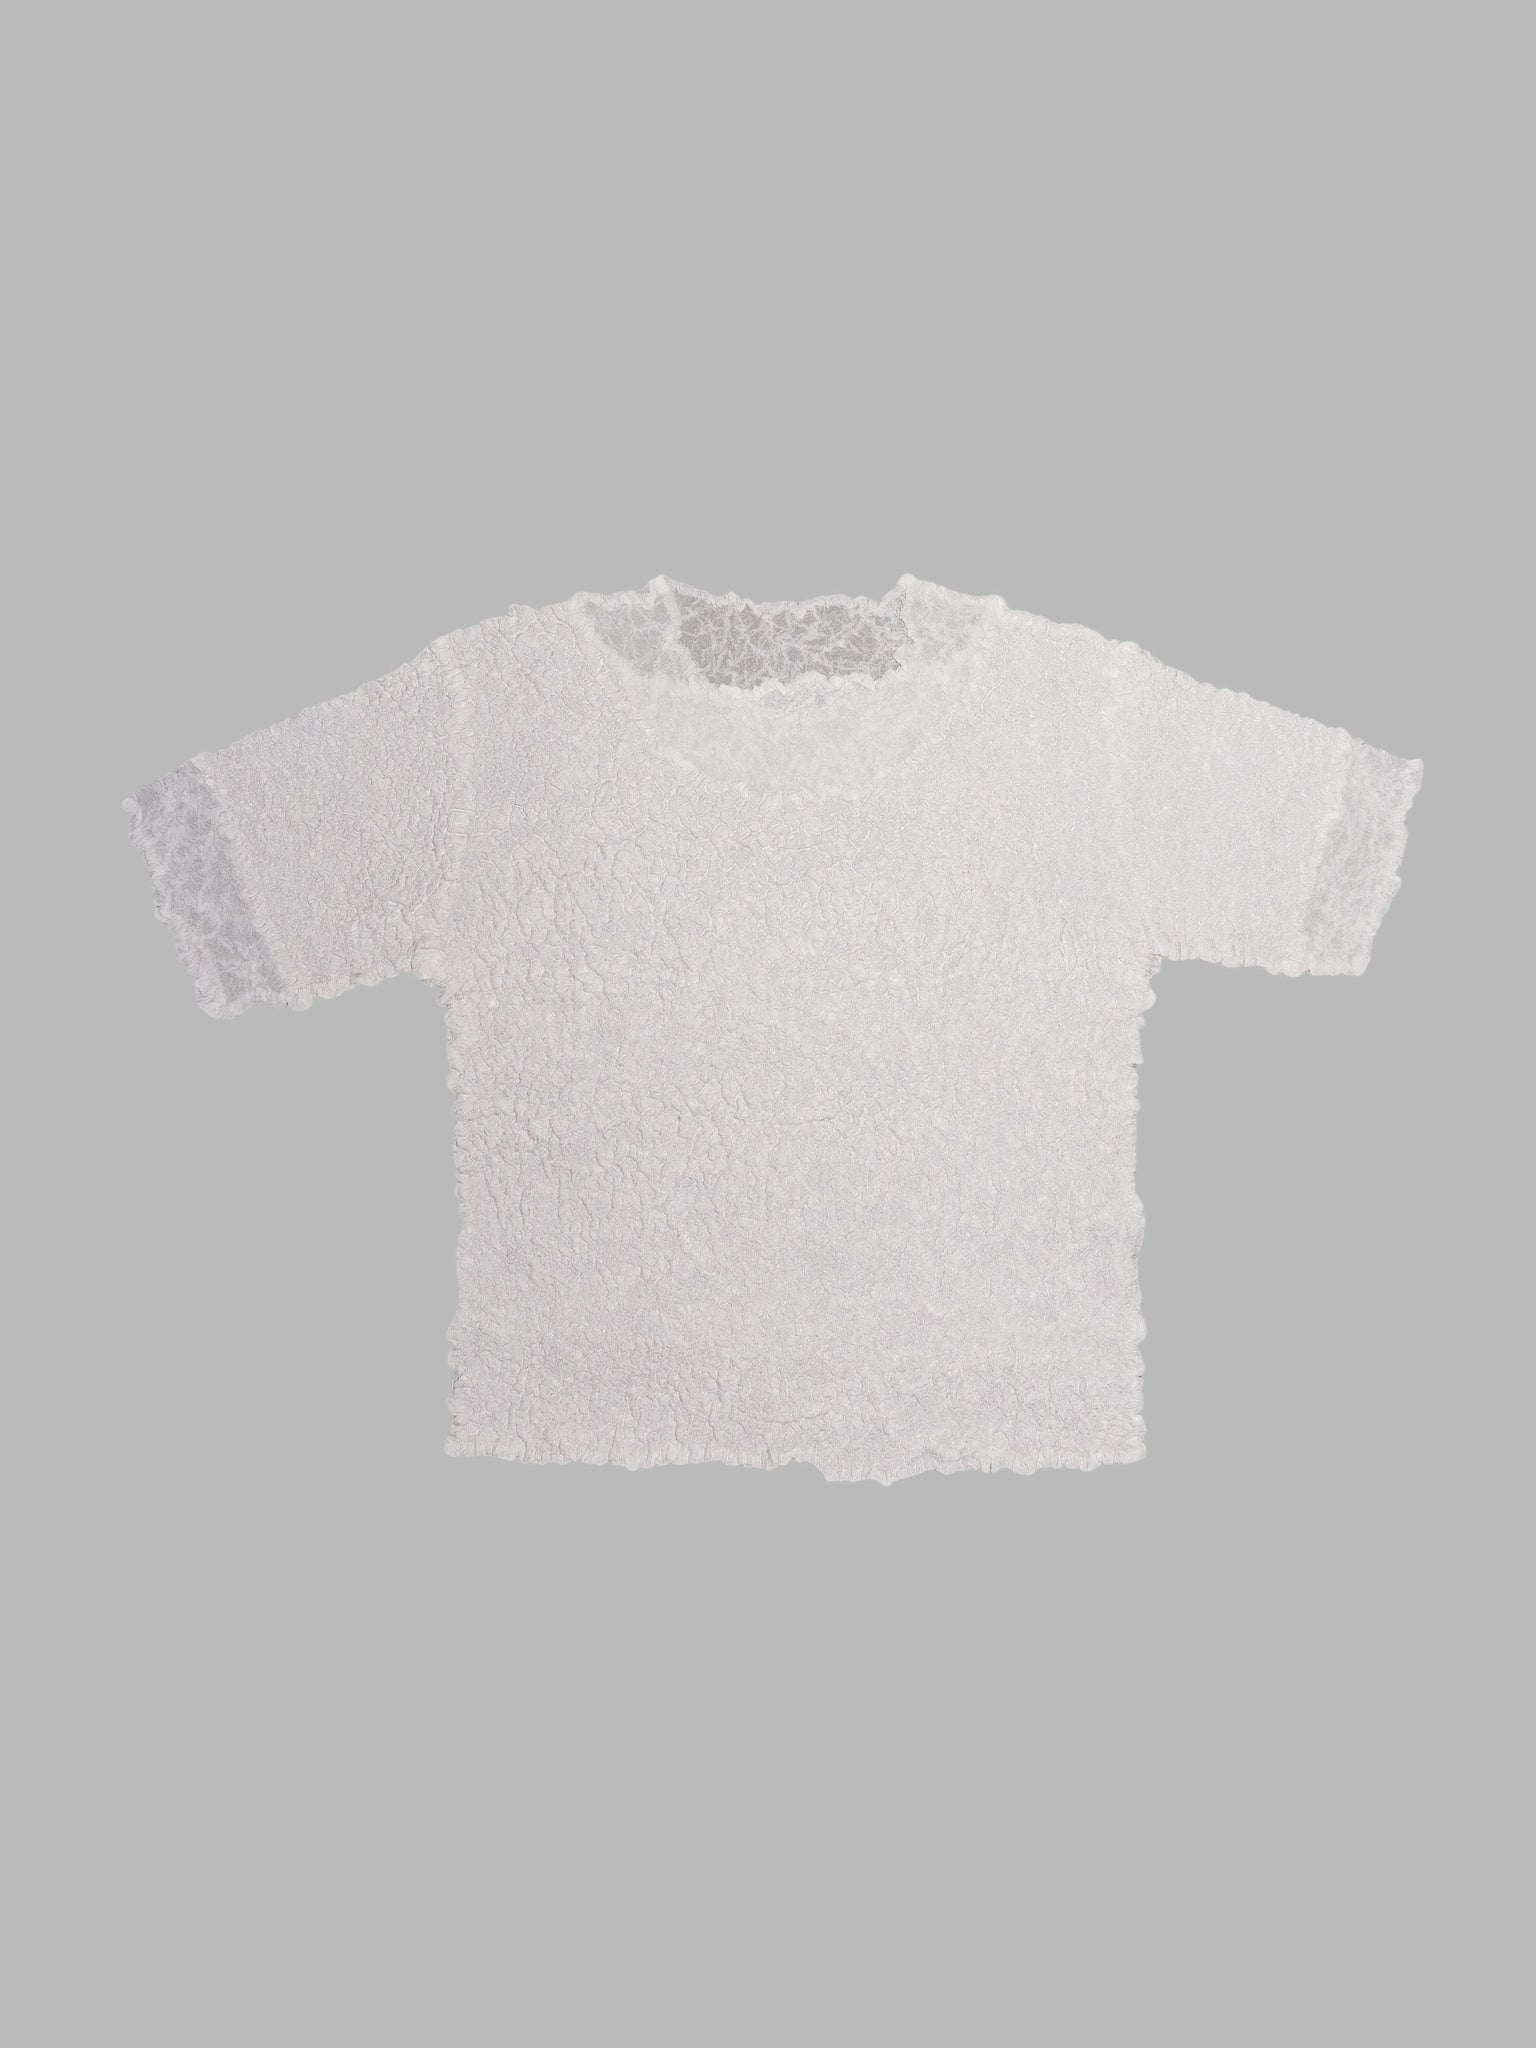 Wrinqle Inoue Pleats white wrinkled polyester t-shirt with sheer edges